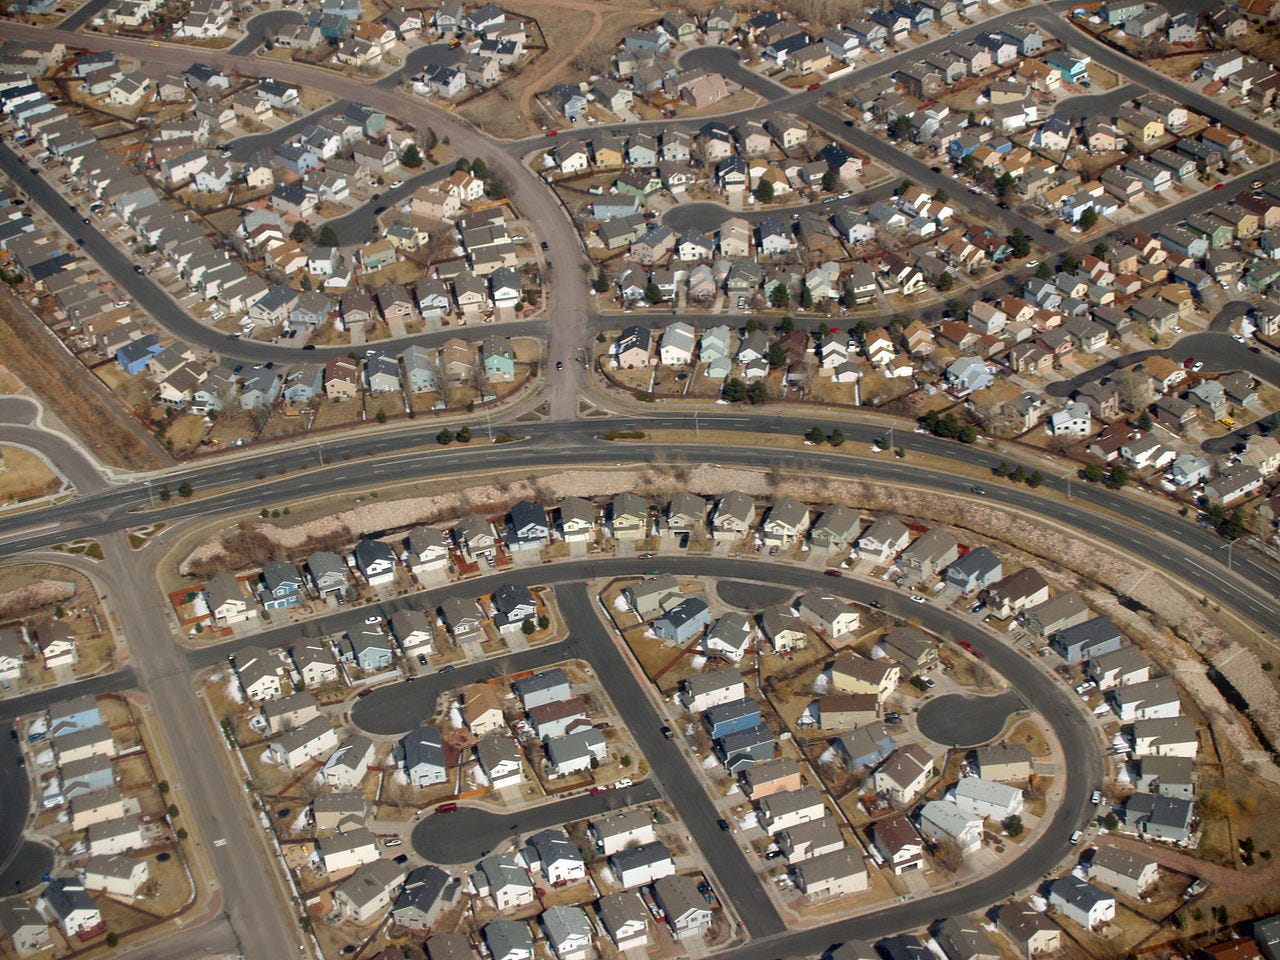 Gallery of The One Redeeming Feature That Brings Humanity to the Sameness  of Suburban Sprawl - 2